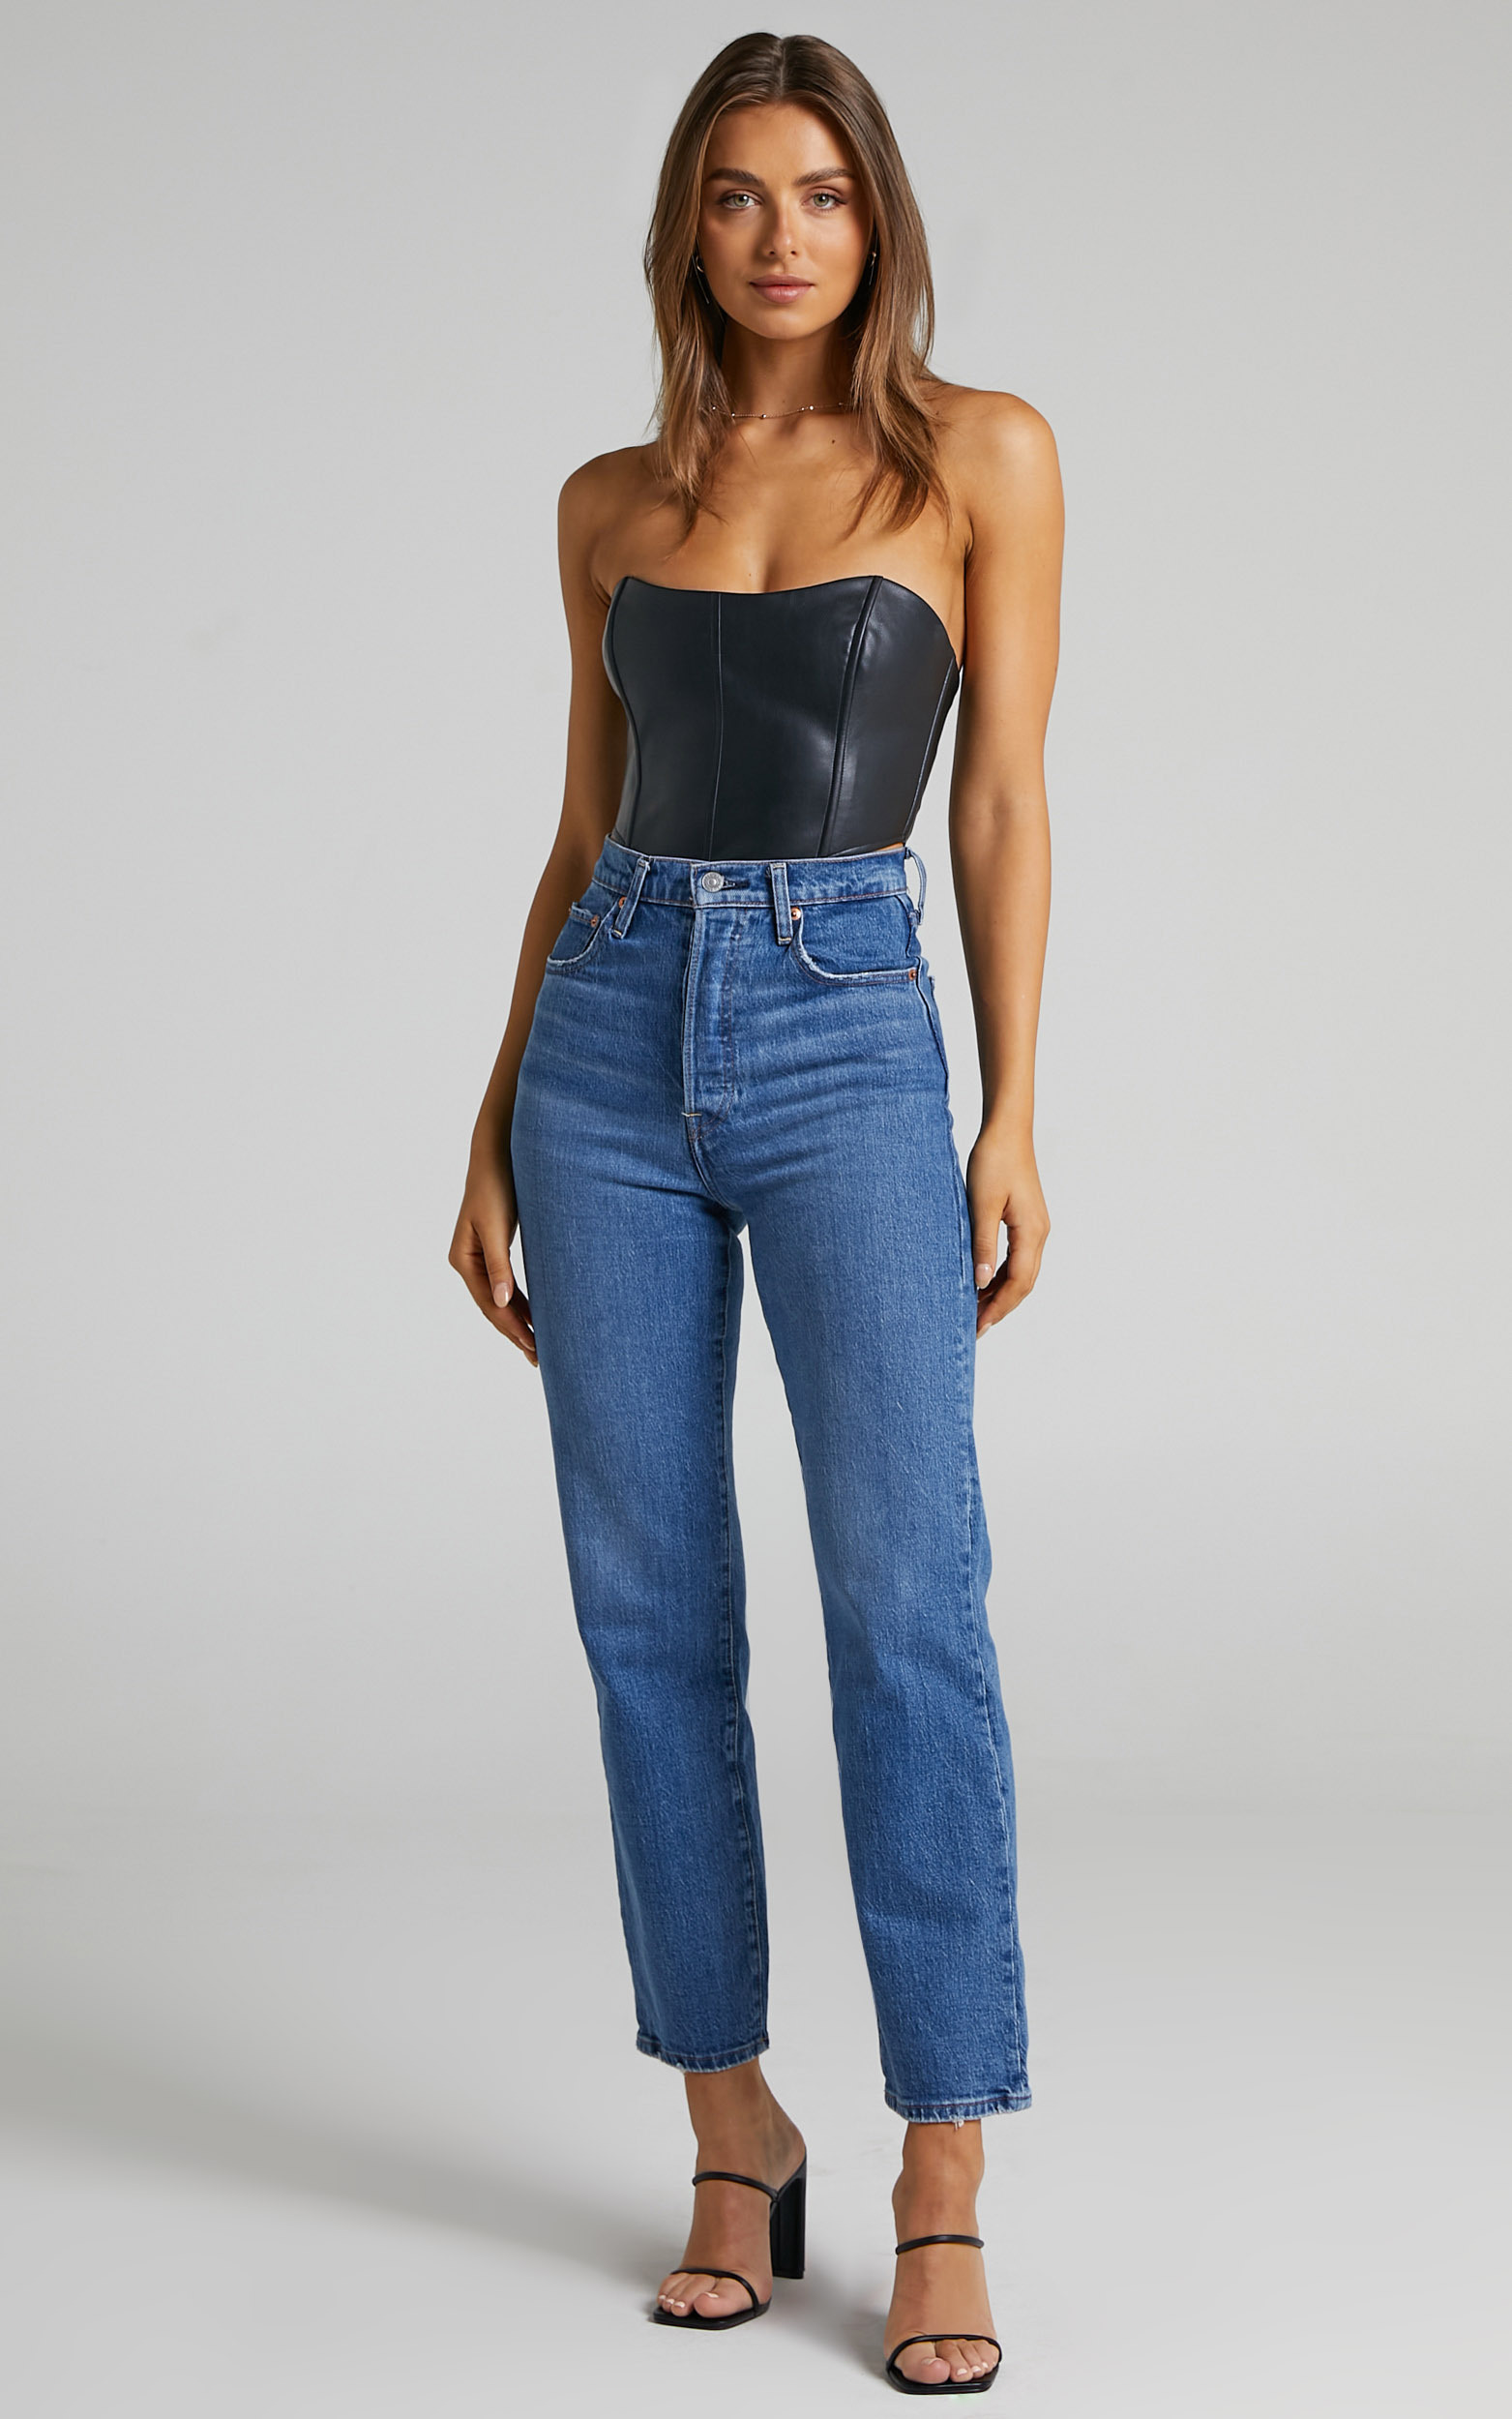 Levi's - High Waisted Ribcage Straight Ankle Jeans in Jazz Jive Together - 06, BLU1, hi-res image number null